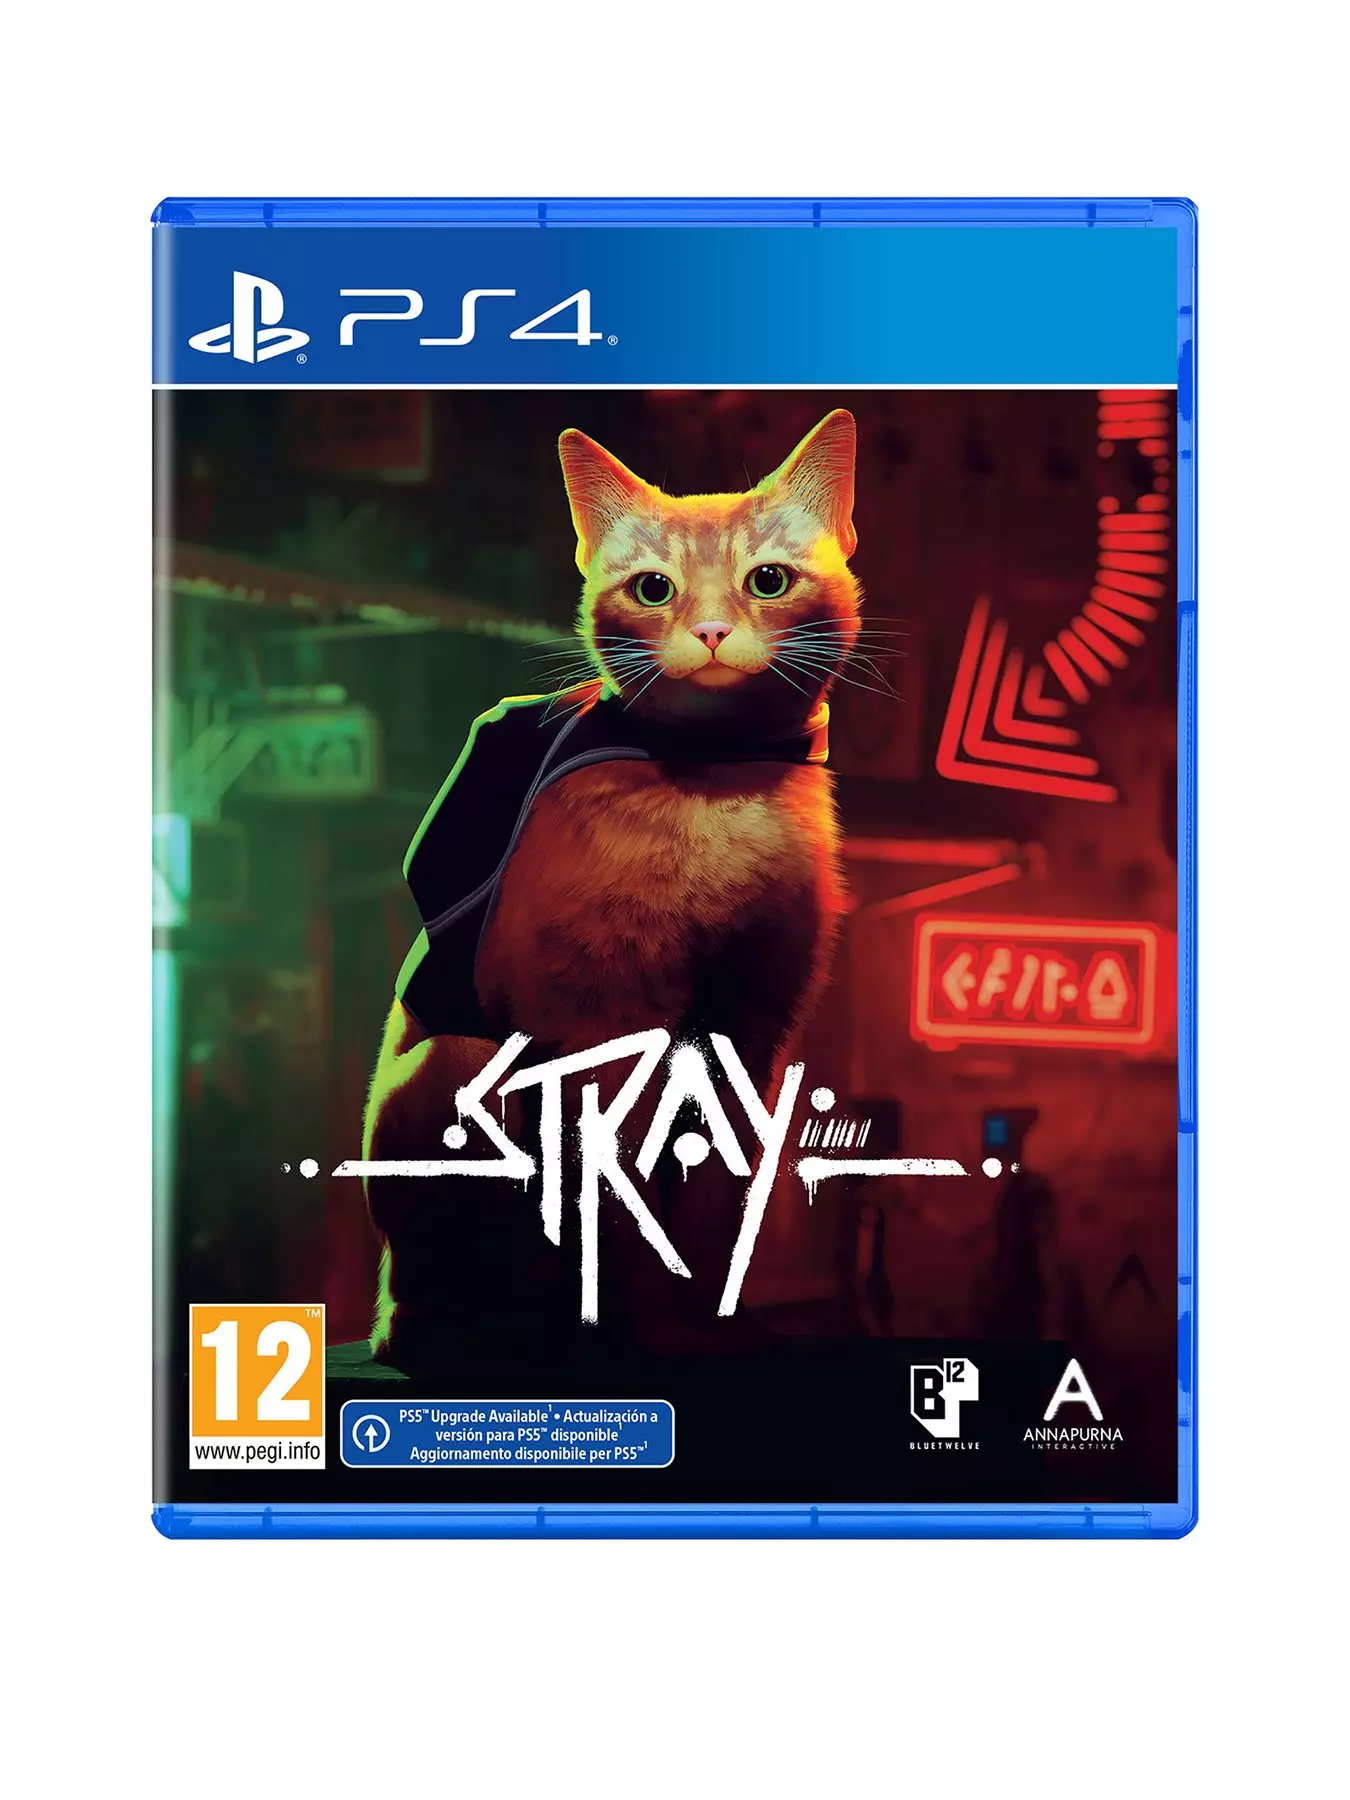 Stray Is a PS5 Sci-fi Game Starring the Best Cat